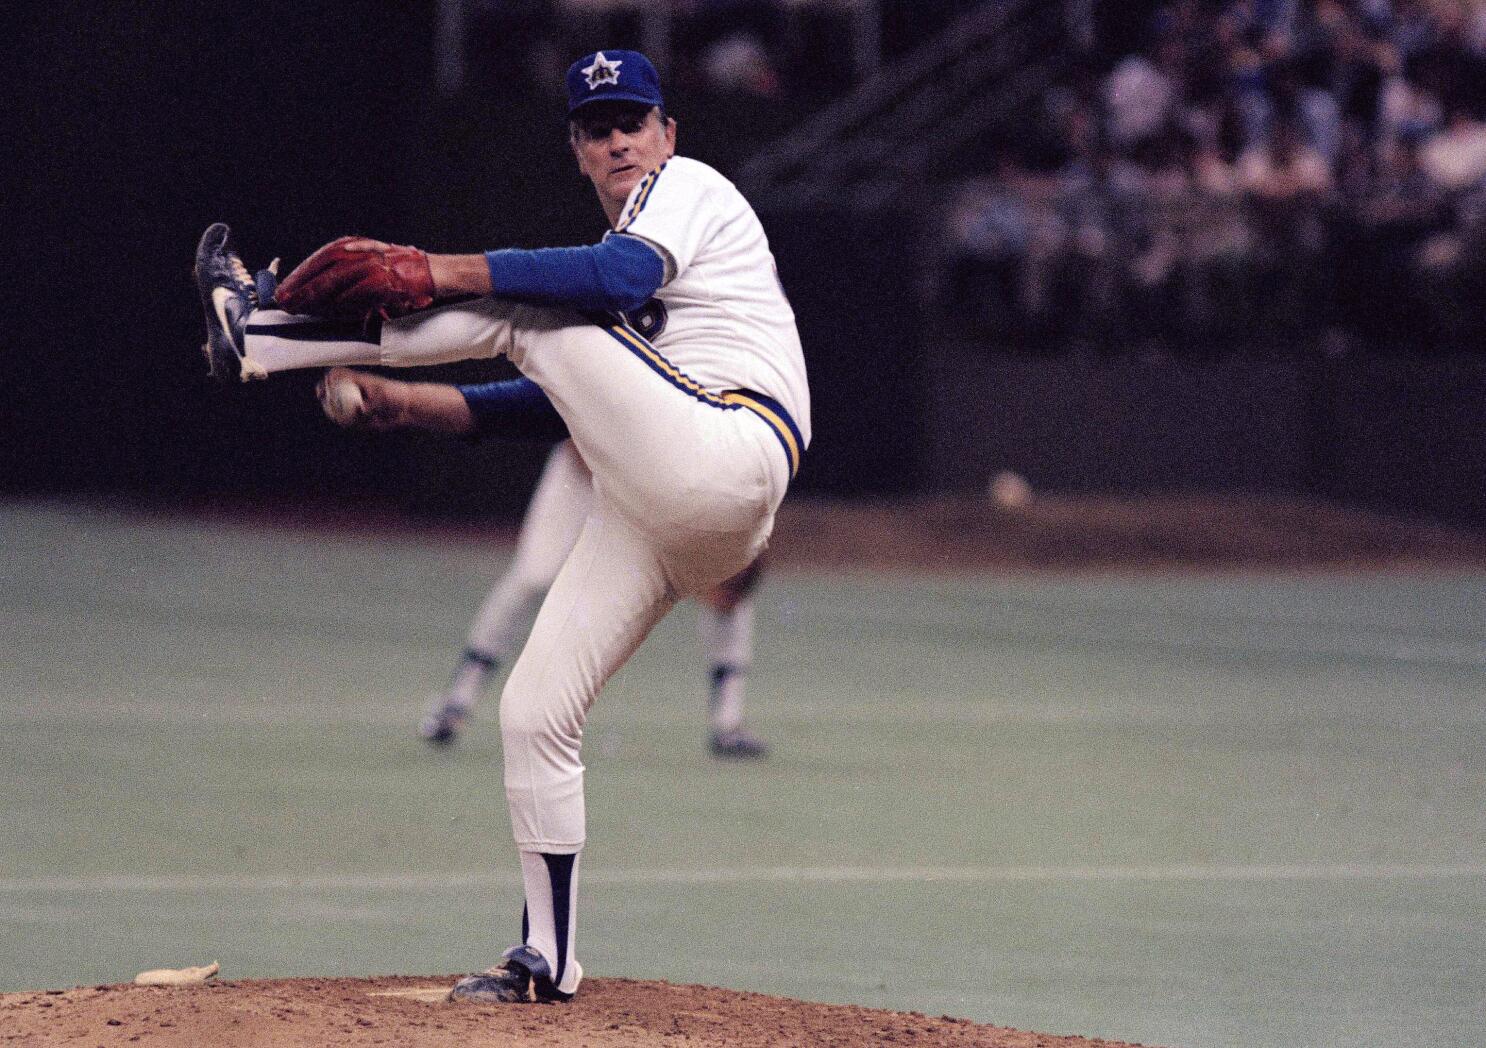 San Diego Padres - ‪Gaylord Perry became the second Padre to win the Cy  Young Award in 1978 and takes the next spot among the top 50 moments in  Padres history.‬ ‪📝‬